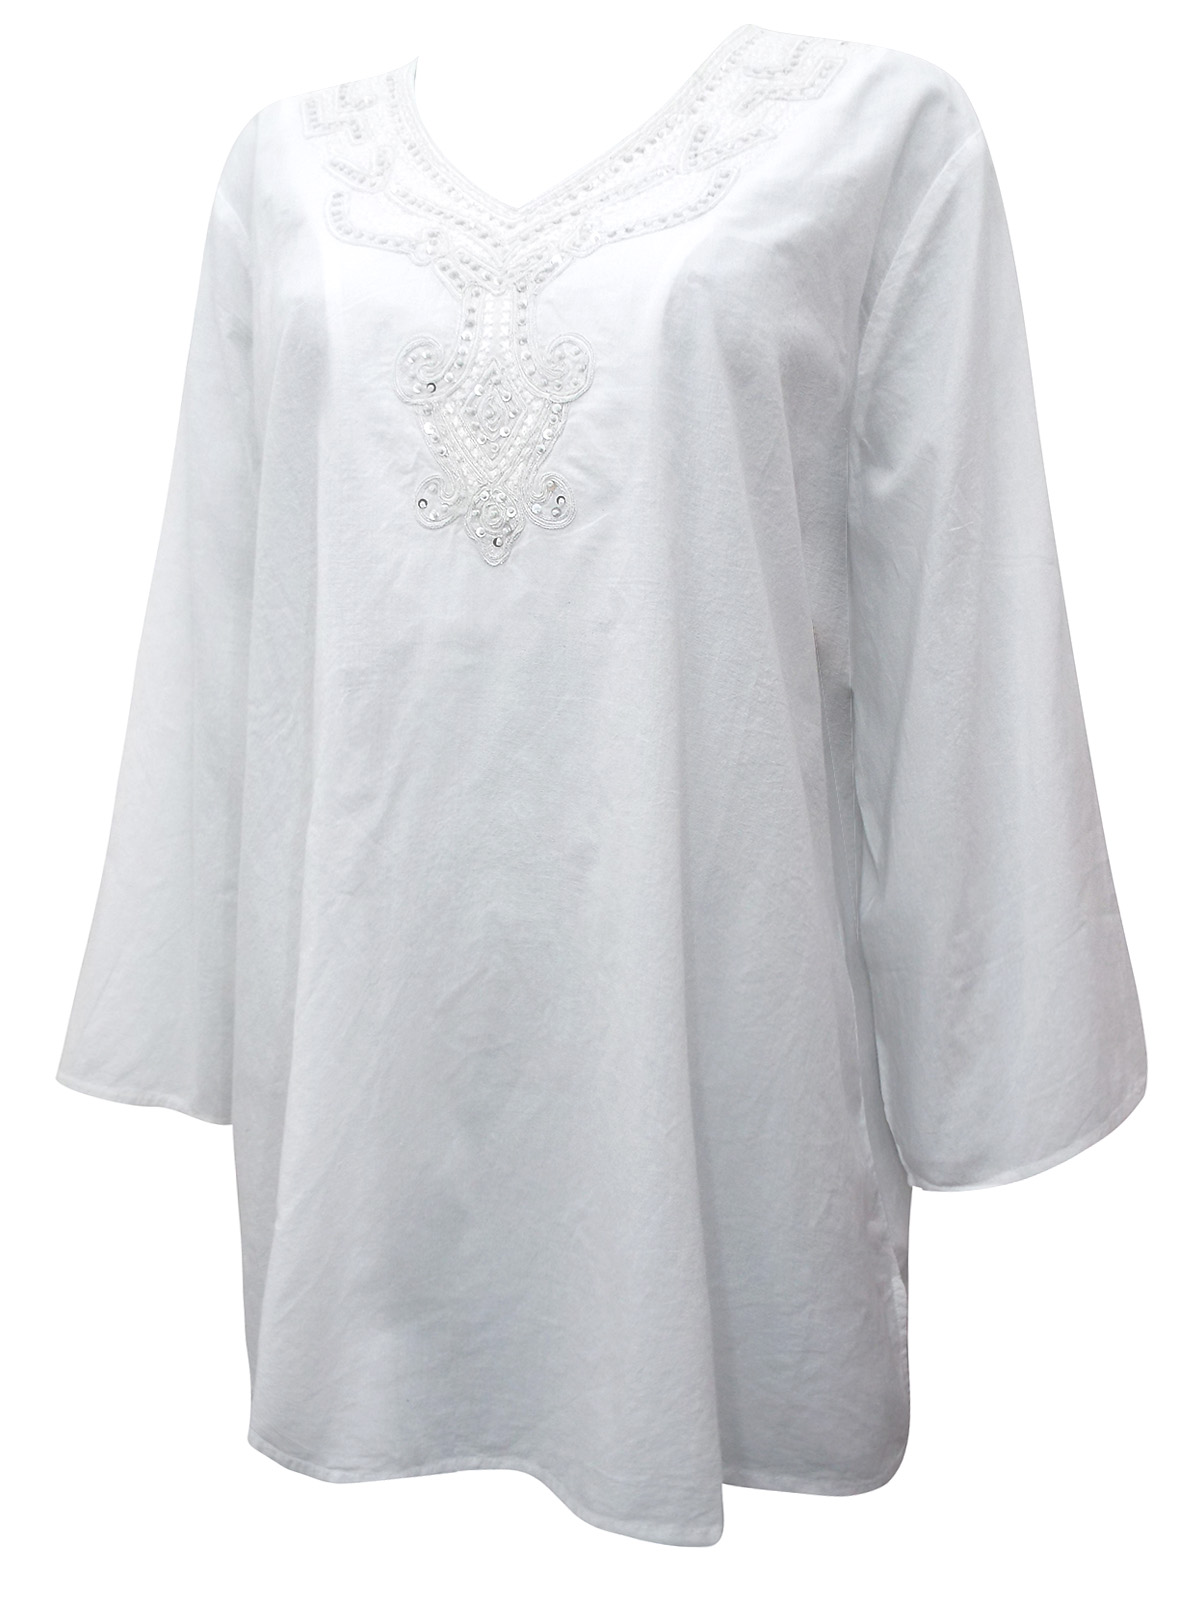 Chicos - - Chicos WHITE Pure Cotton 3/4 Sleeve Embellished Top - Plus ...